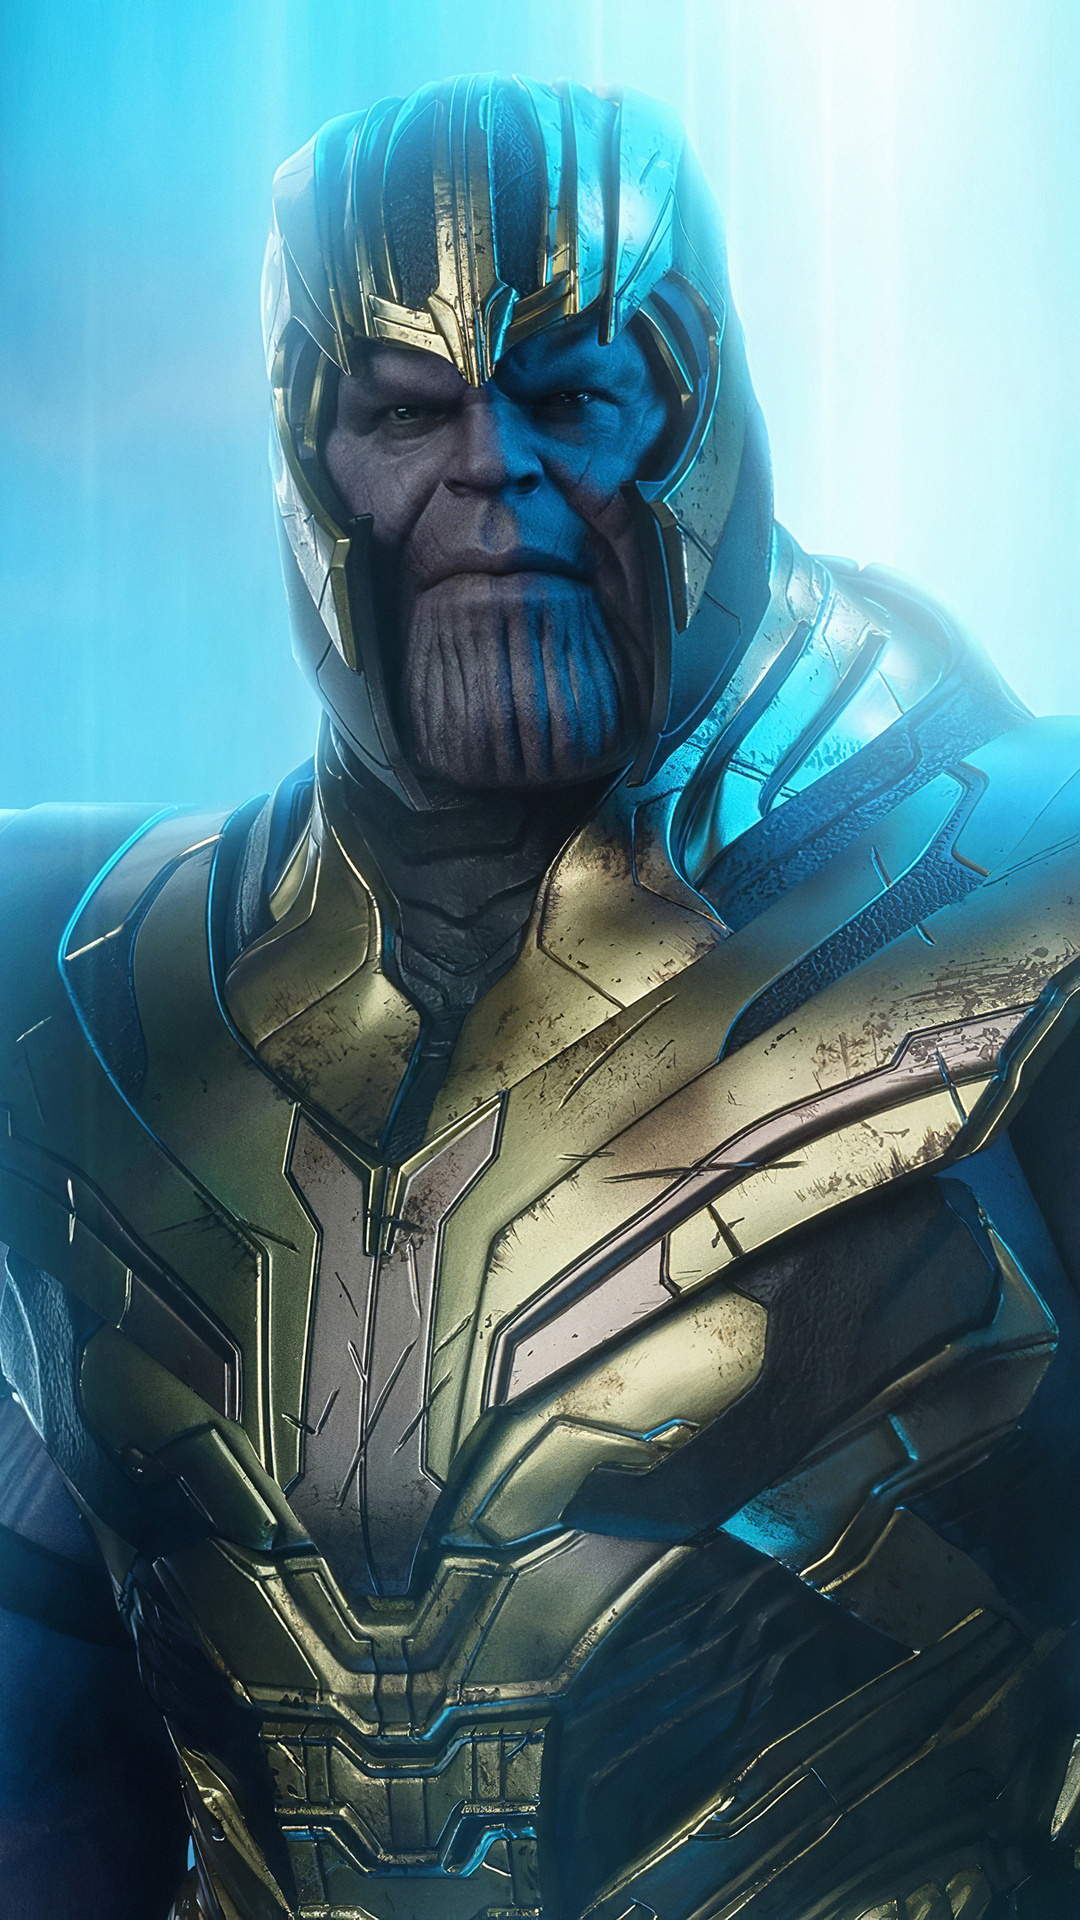 Thanos, Bring back to me, iPhone wallpapers, Marvel's epic villain, 1080x1920 Full HD Handy